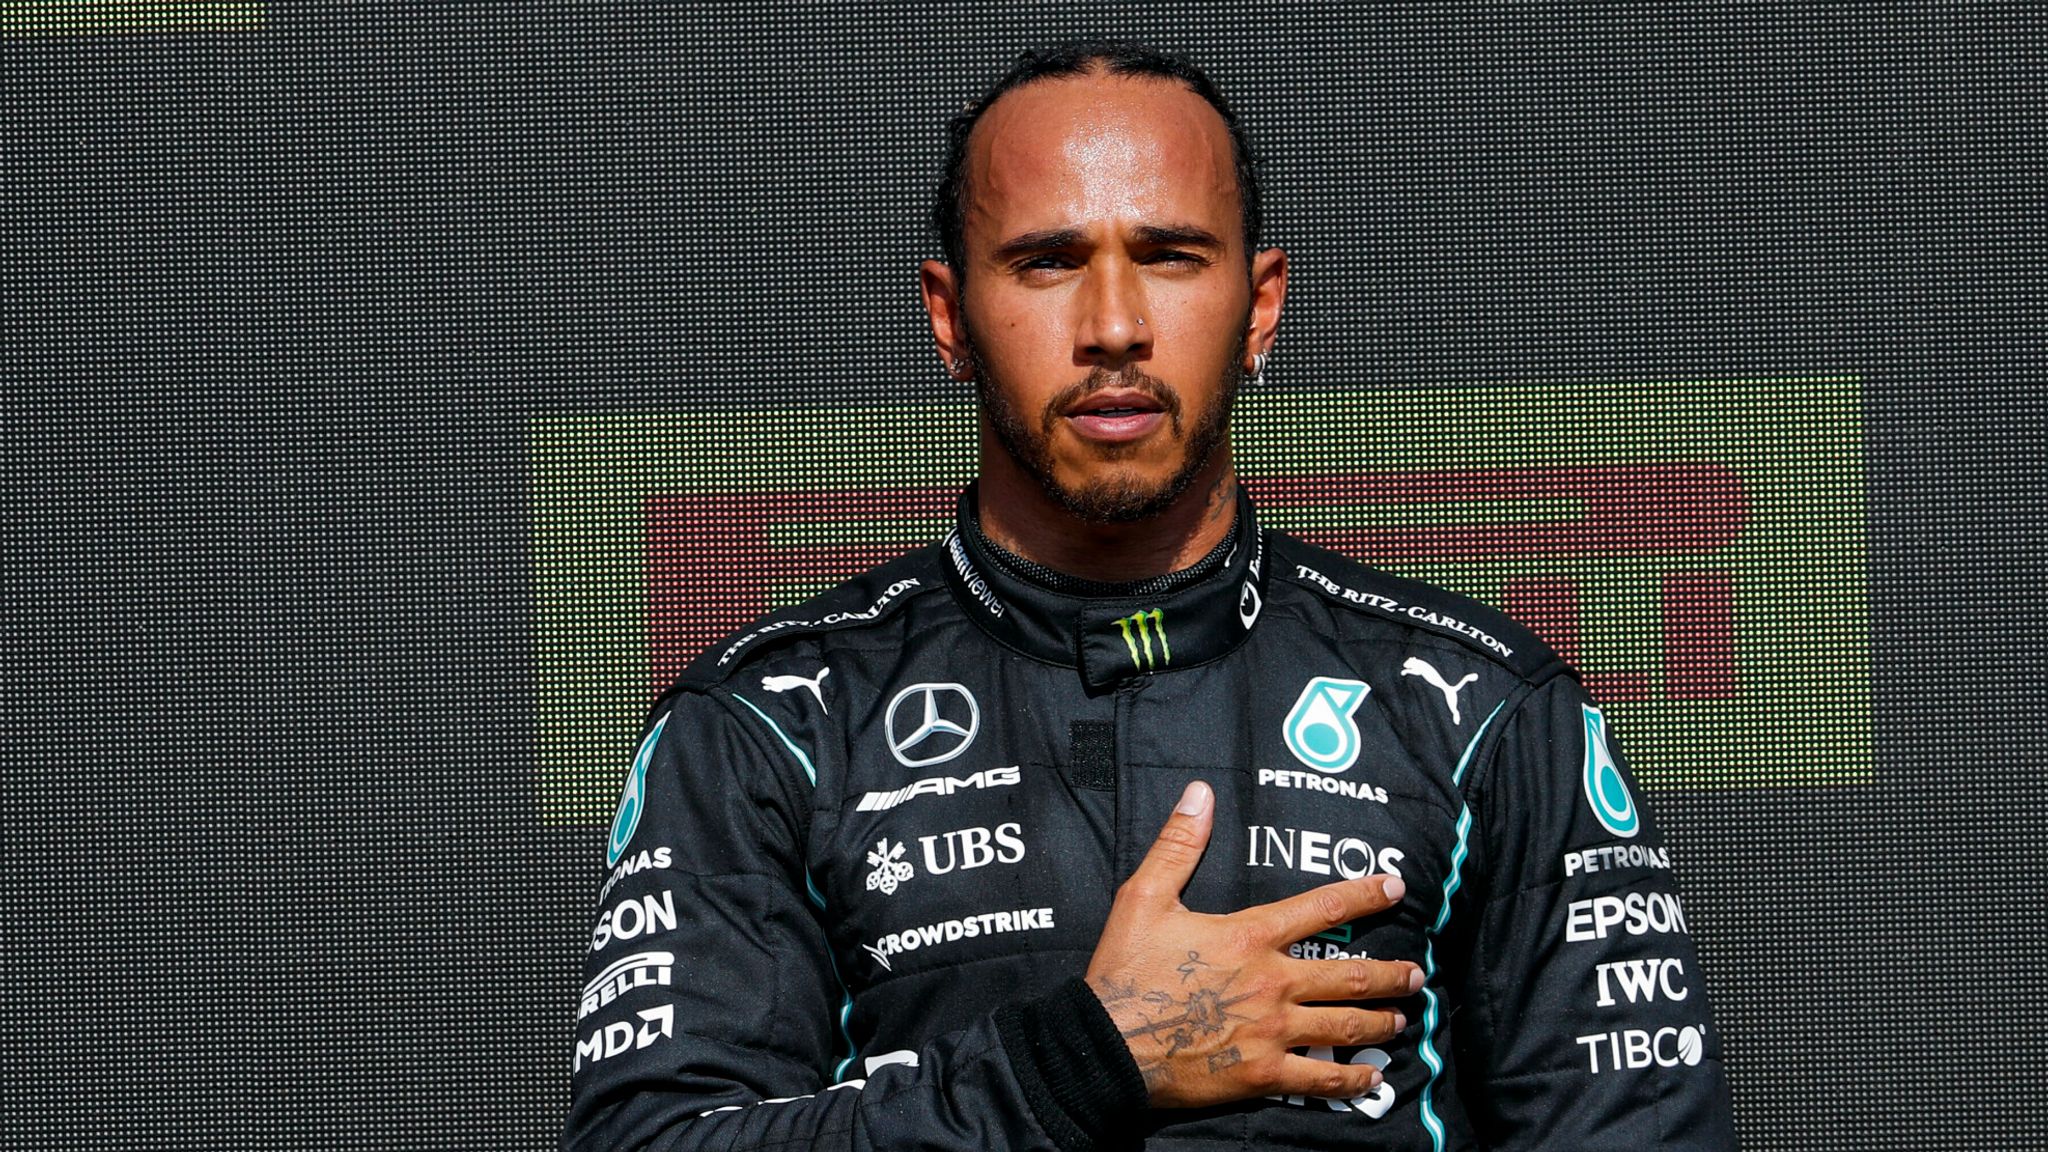 Lewis Hamilton Targeted By Racists Online After British Grand Prix Win And Max Verstappen Crash Uk News Sky News